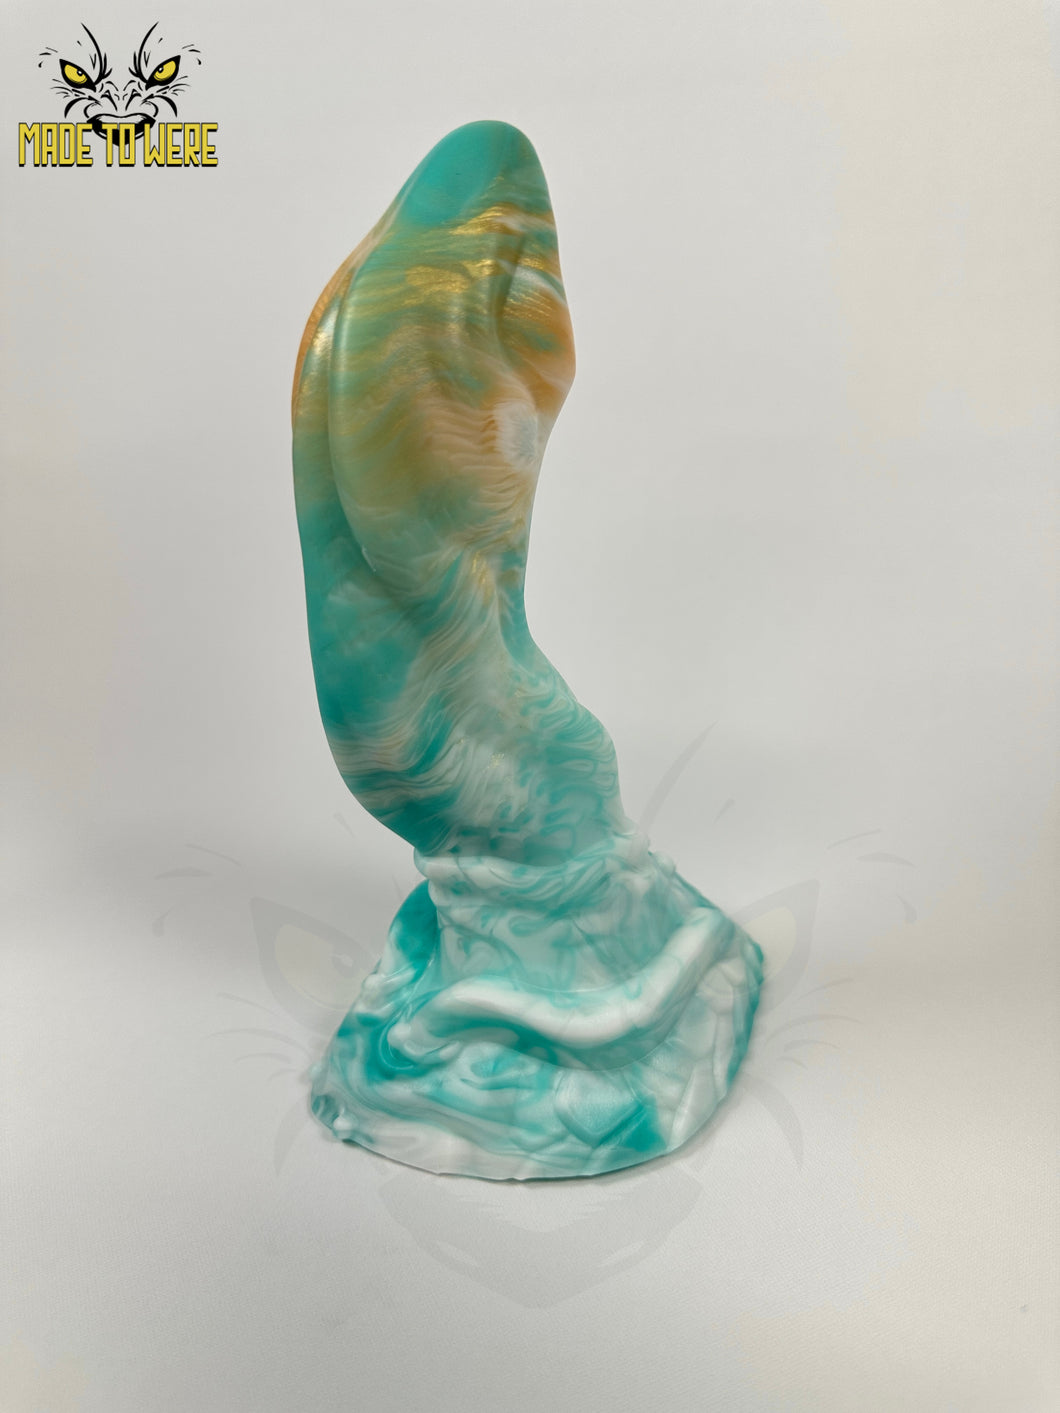 Small Crowley, Single Shaft, Soft 00-30 Firmness, Teal Gold Marble